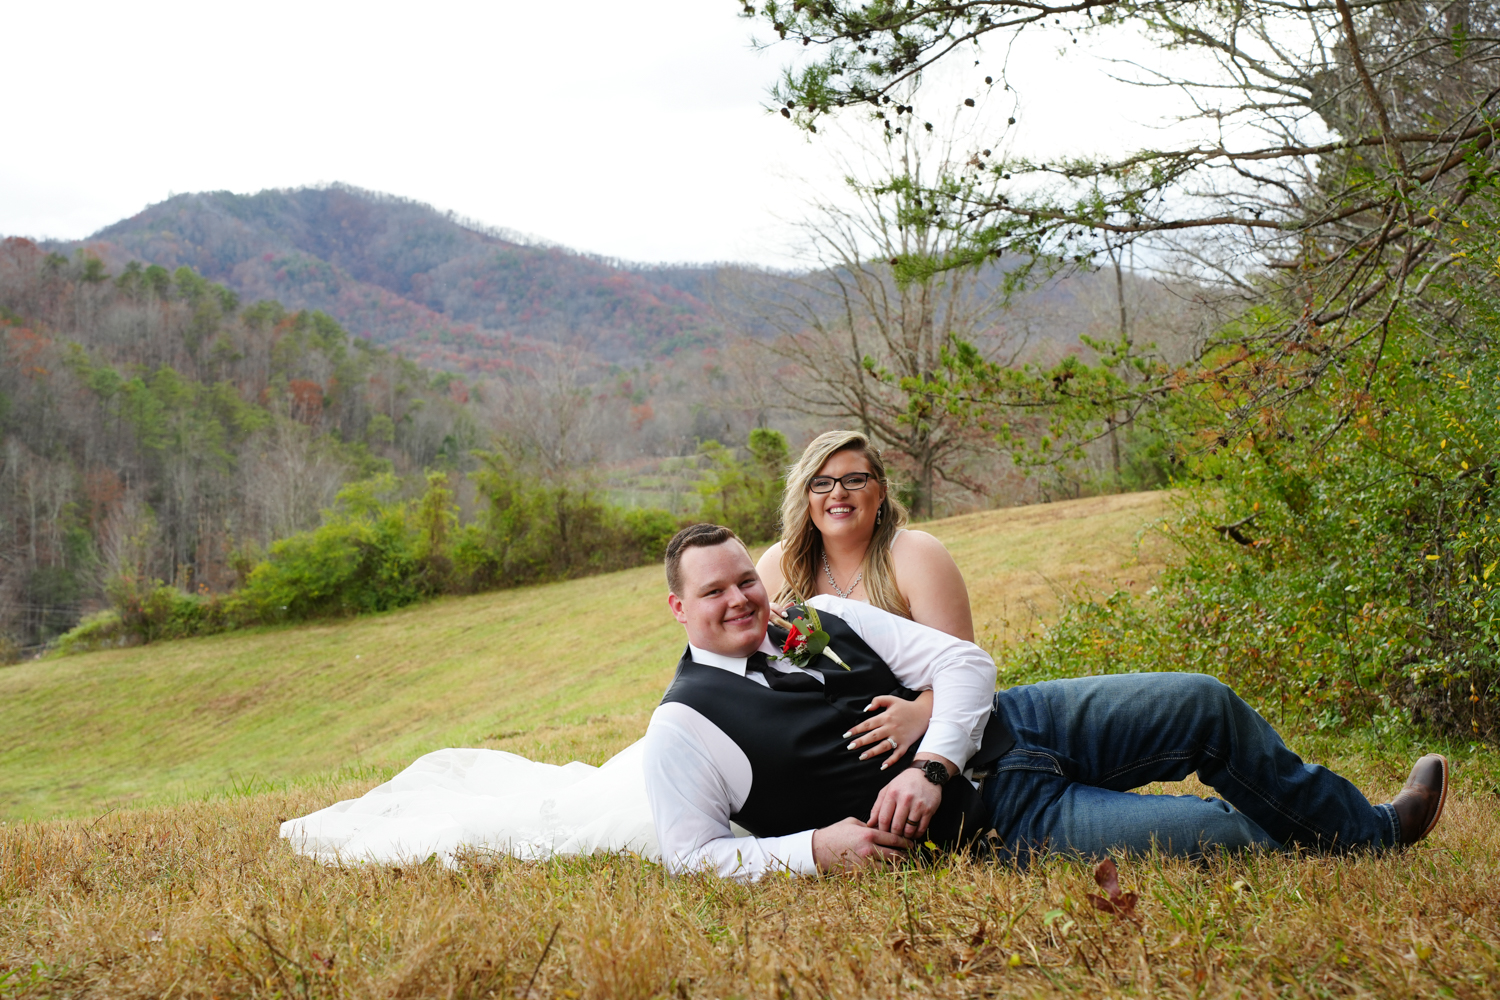 Wedding couple sitting in front of a mountain meadow view